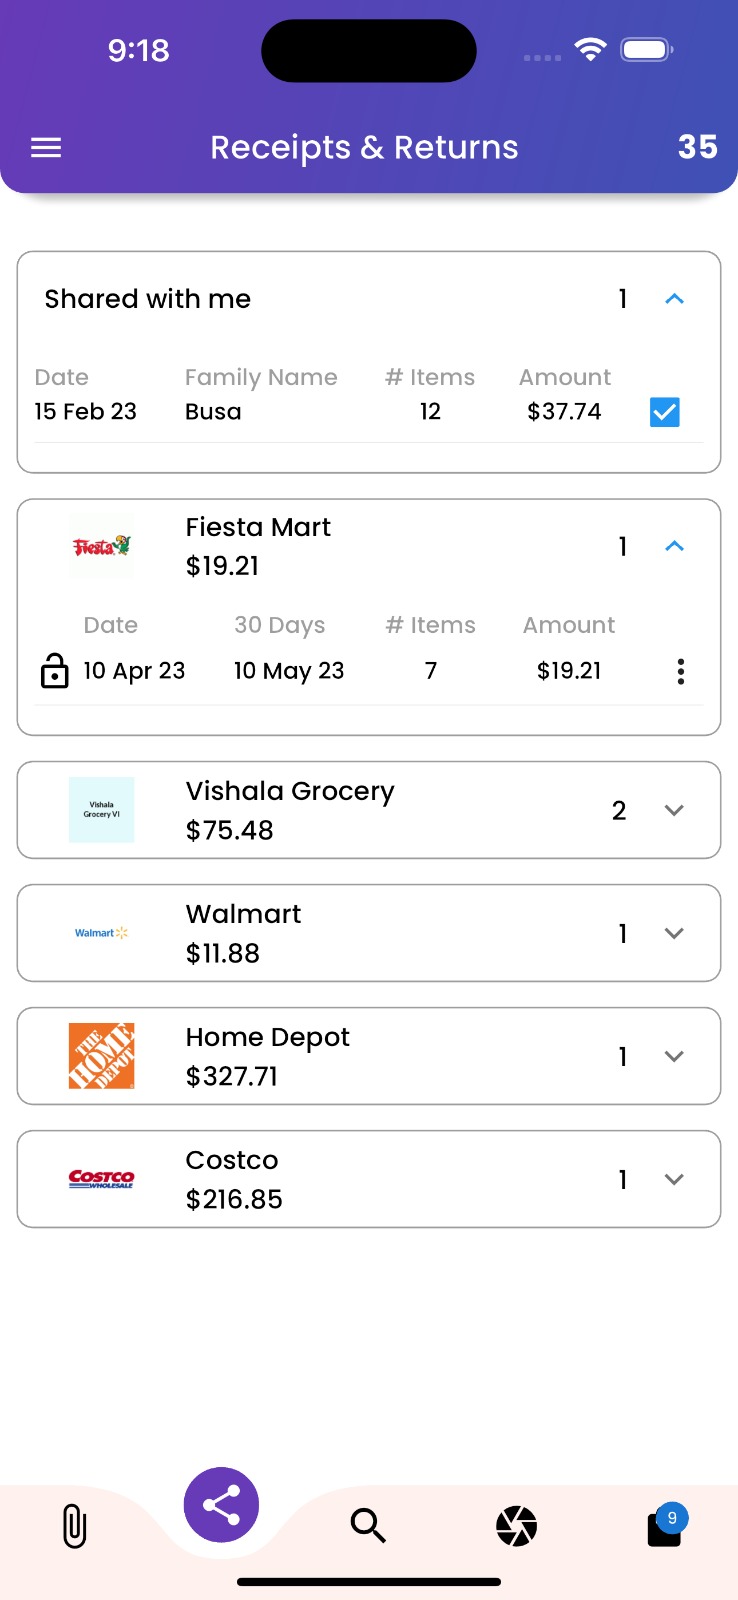 Receipts sorted by stores